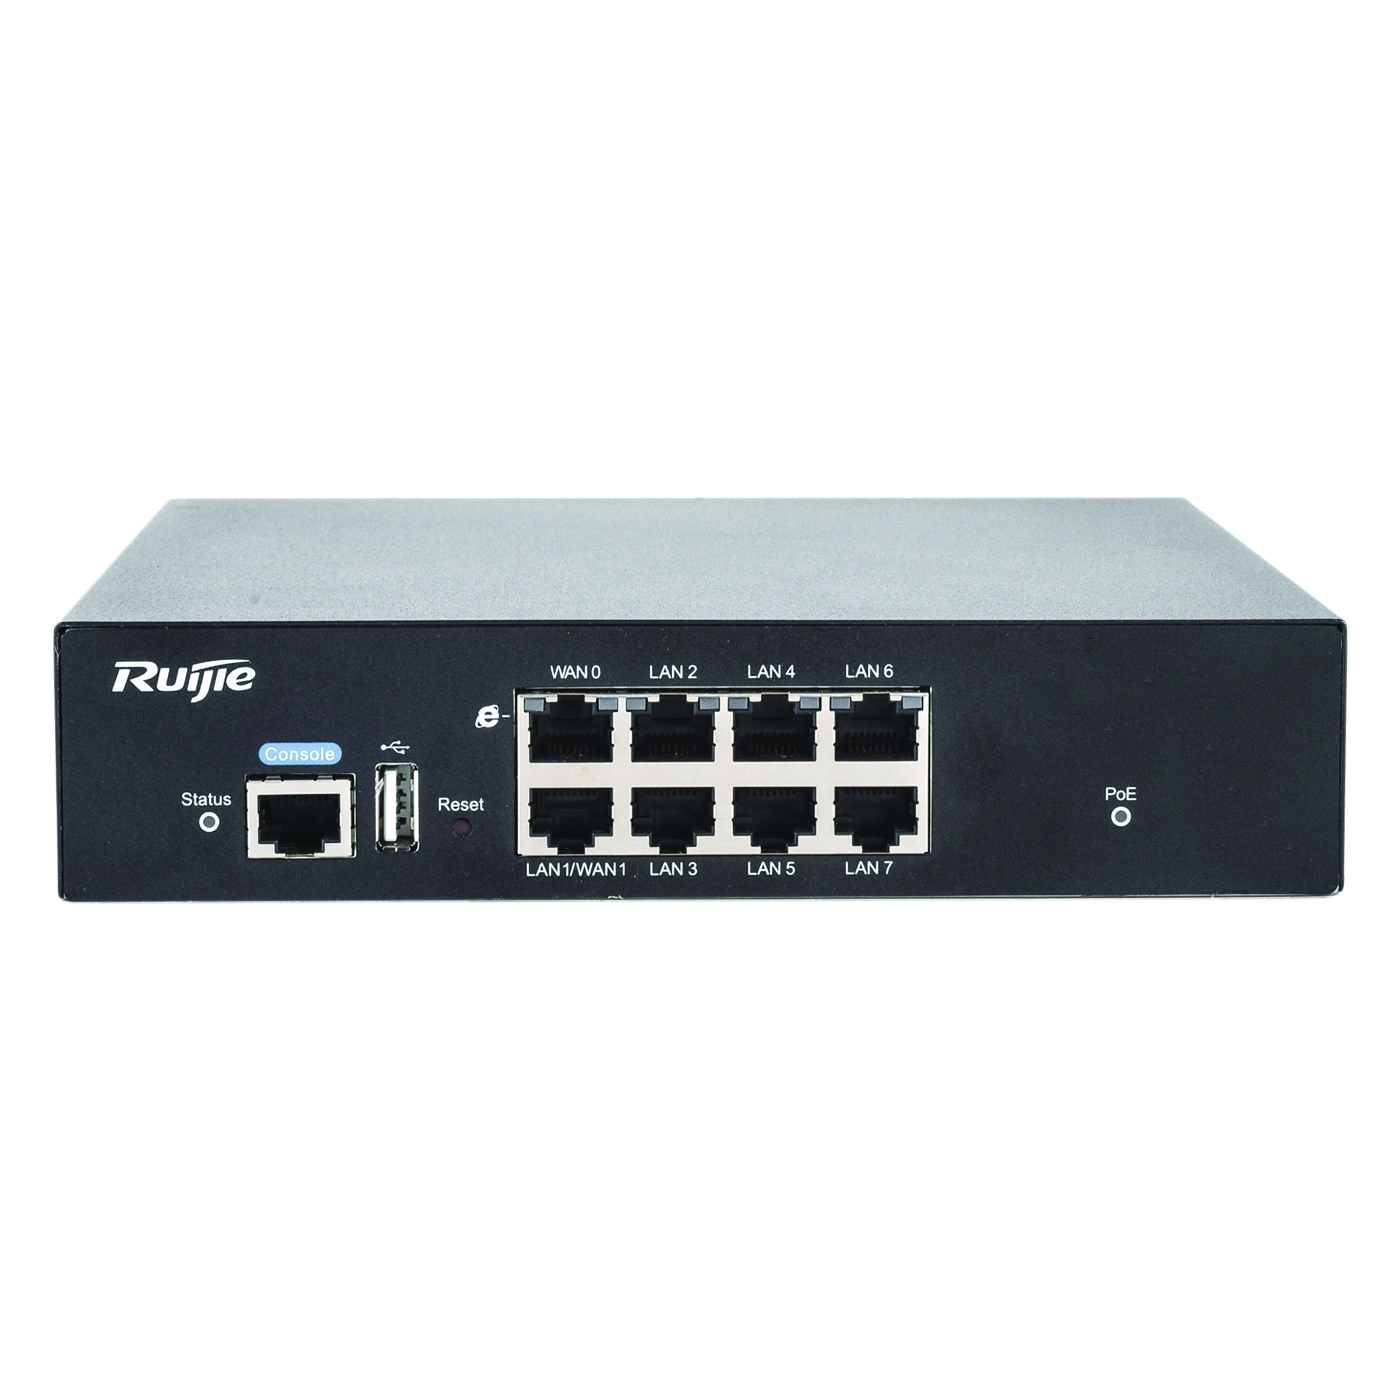 7 Port 1 Gbps Unified Security Gateway PoE+ Router up to 2 WAN Load balanced